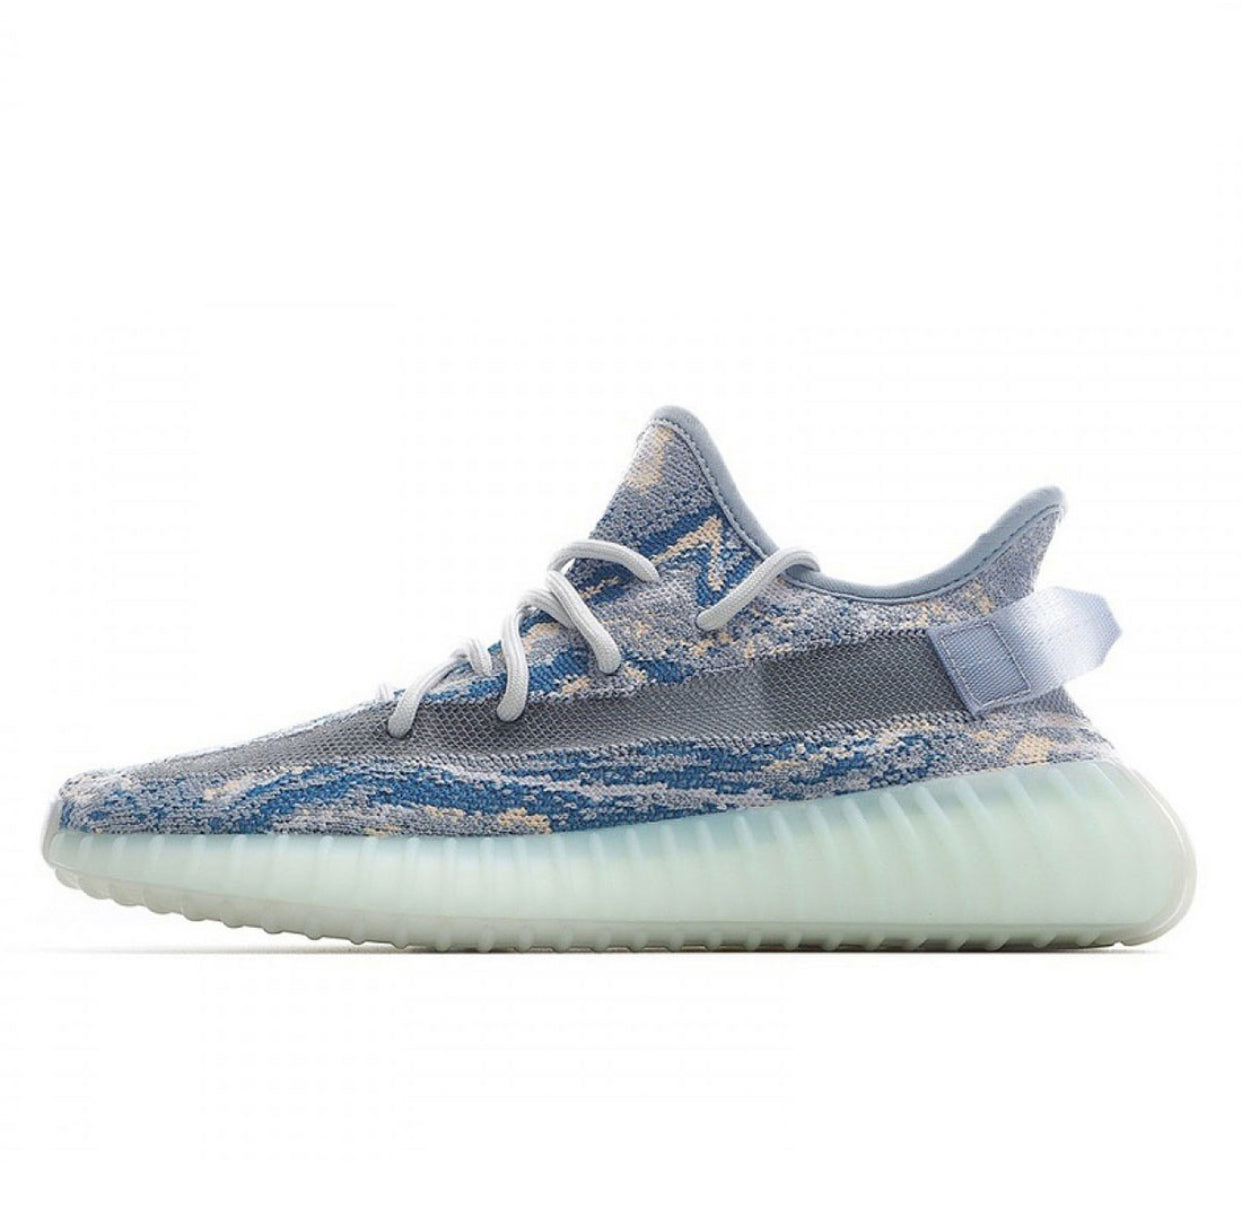 Yeezy Boost 350 V2 ‘MX Frost Blue’